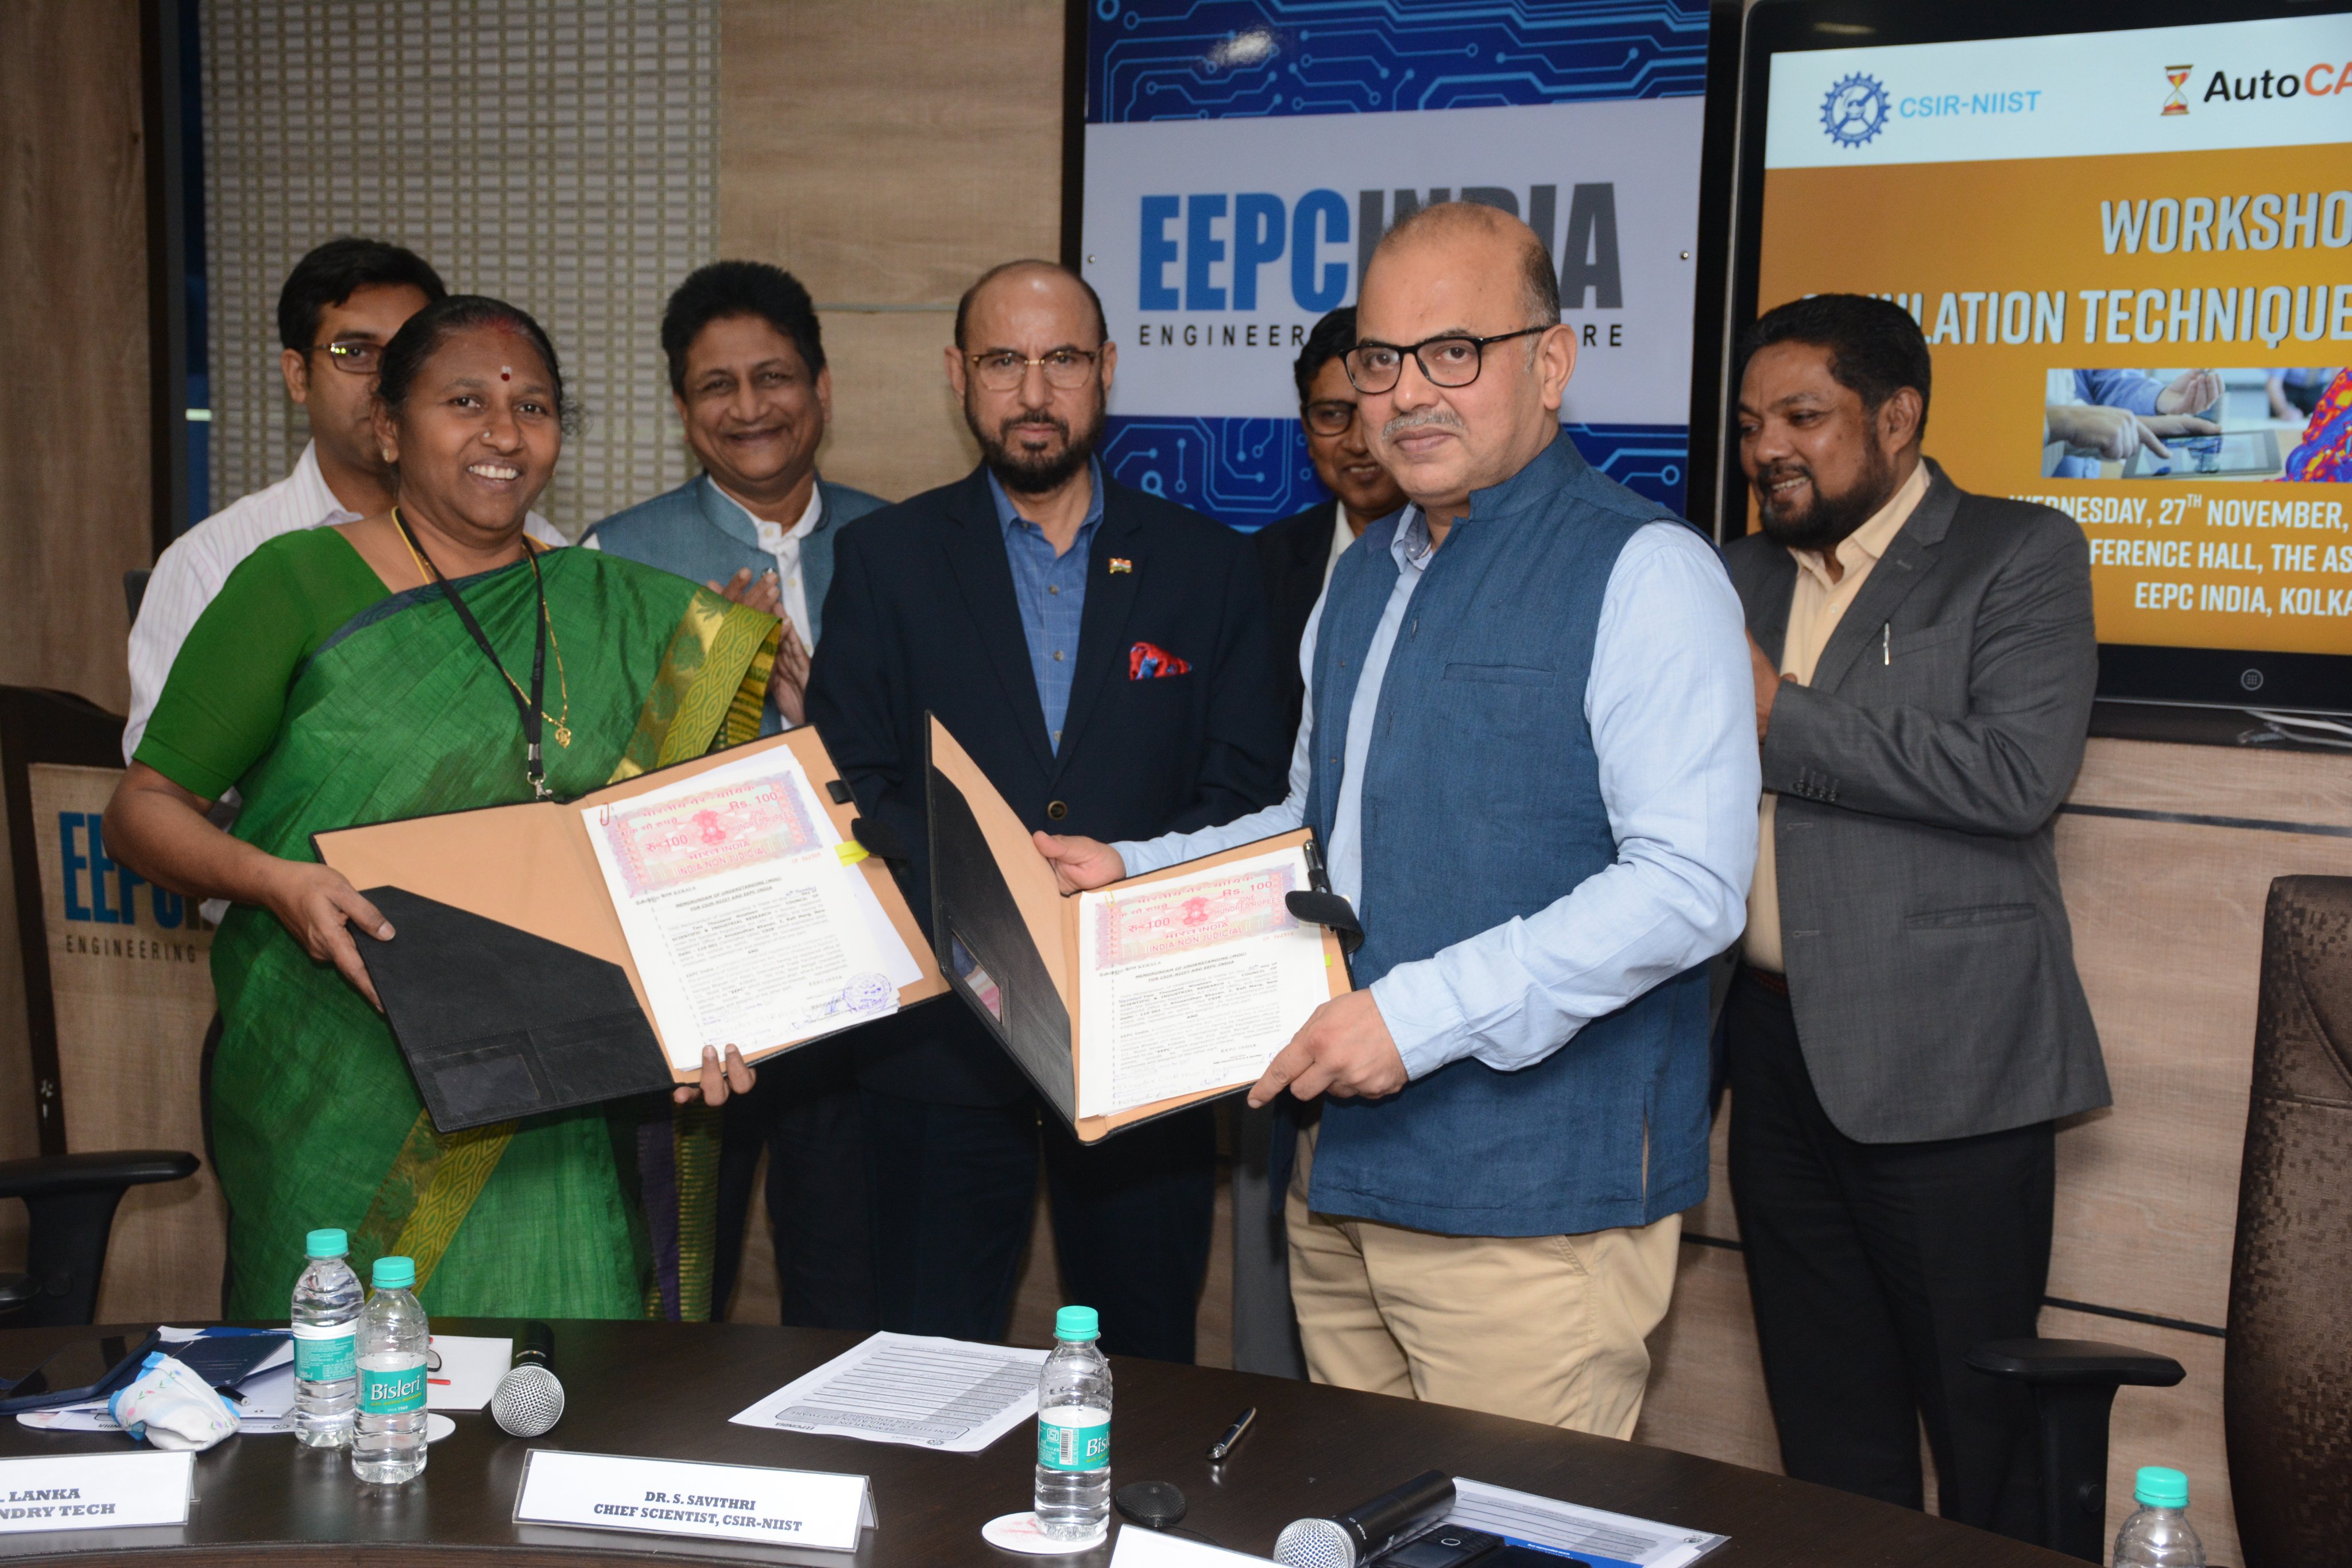 Mr Adhip Mitra, Addl. Executive Director & Secretary inked MoU on behalf of EEPC India with Dr S Savithri, Chief Scientist, CSIR-NIIST on future collaboration between EEPC India, Technology Centre and CSIR NIIST in presence of Mr Ravi Sehgal, Chairman, Mr Suranjan Gupta, Executive Director and Mr Bhaskar Sarkar, Advisor, EEPC India Technology Centre